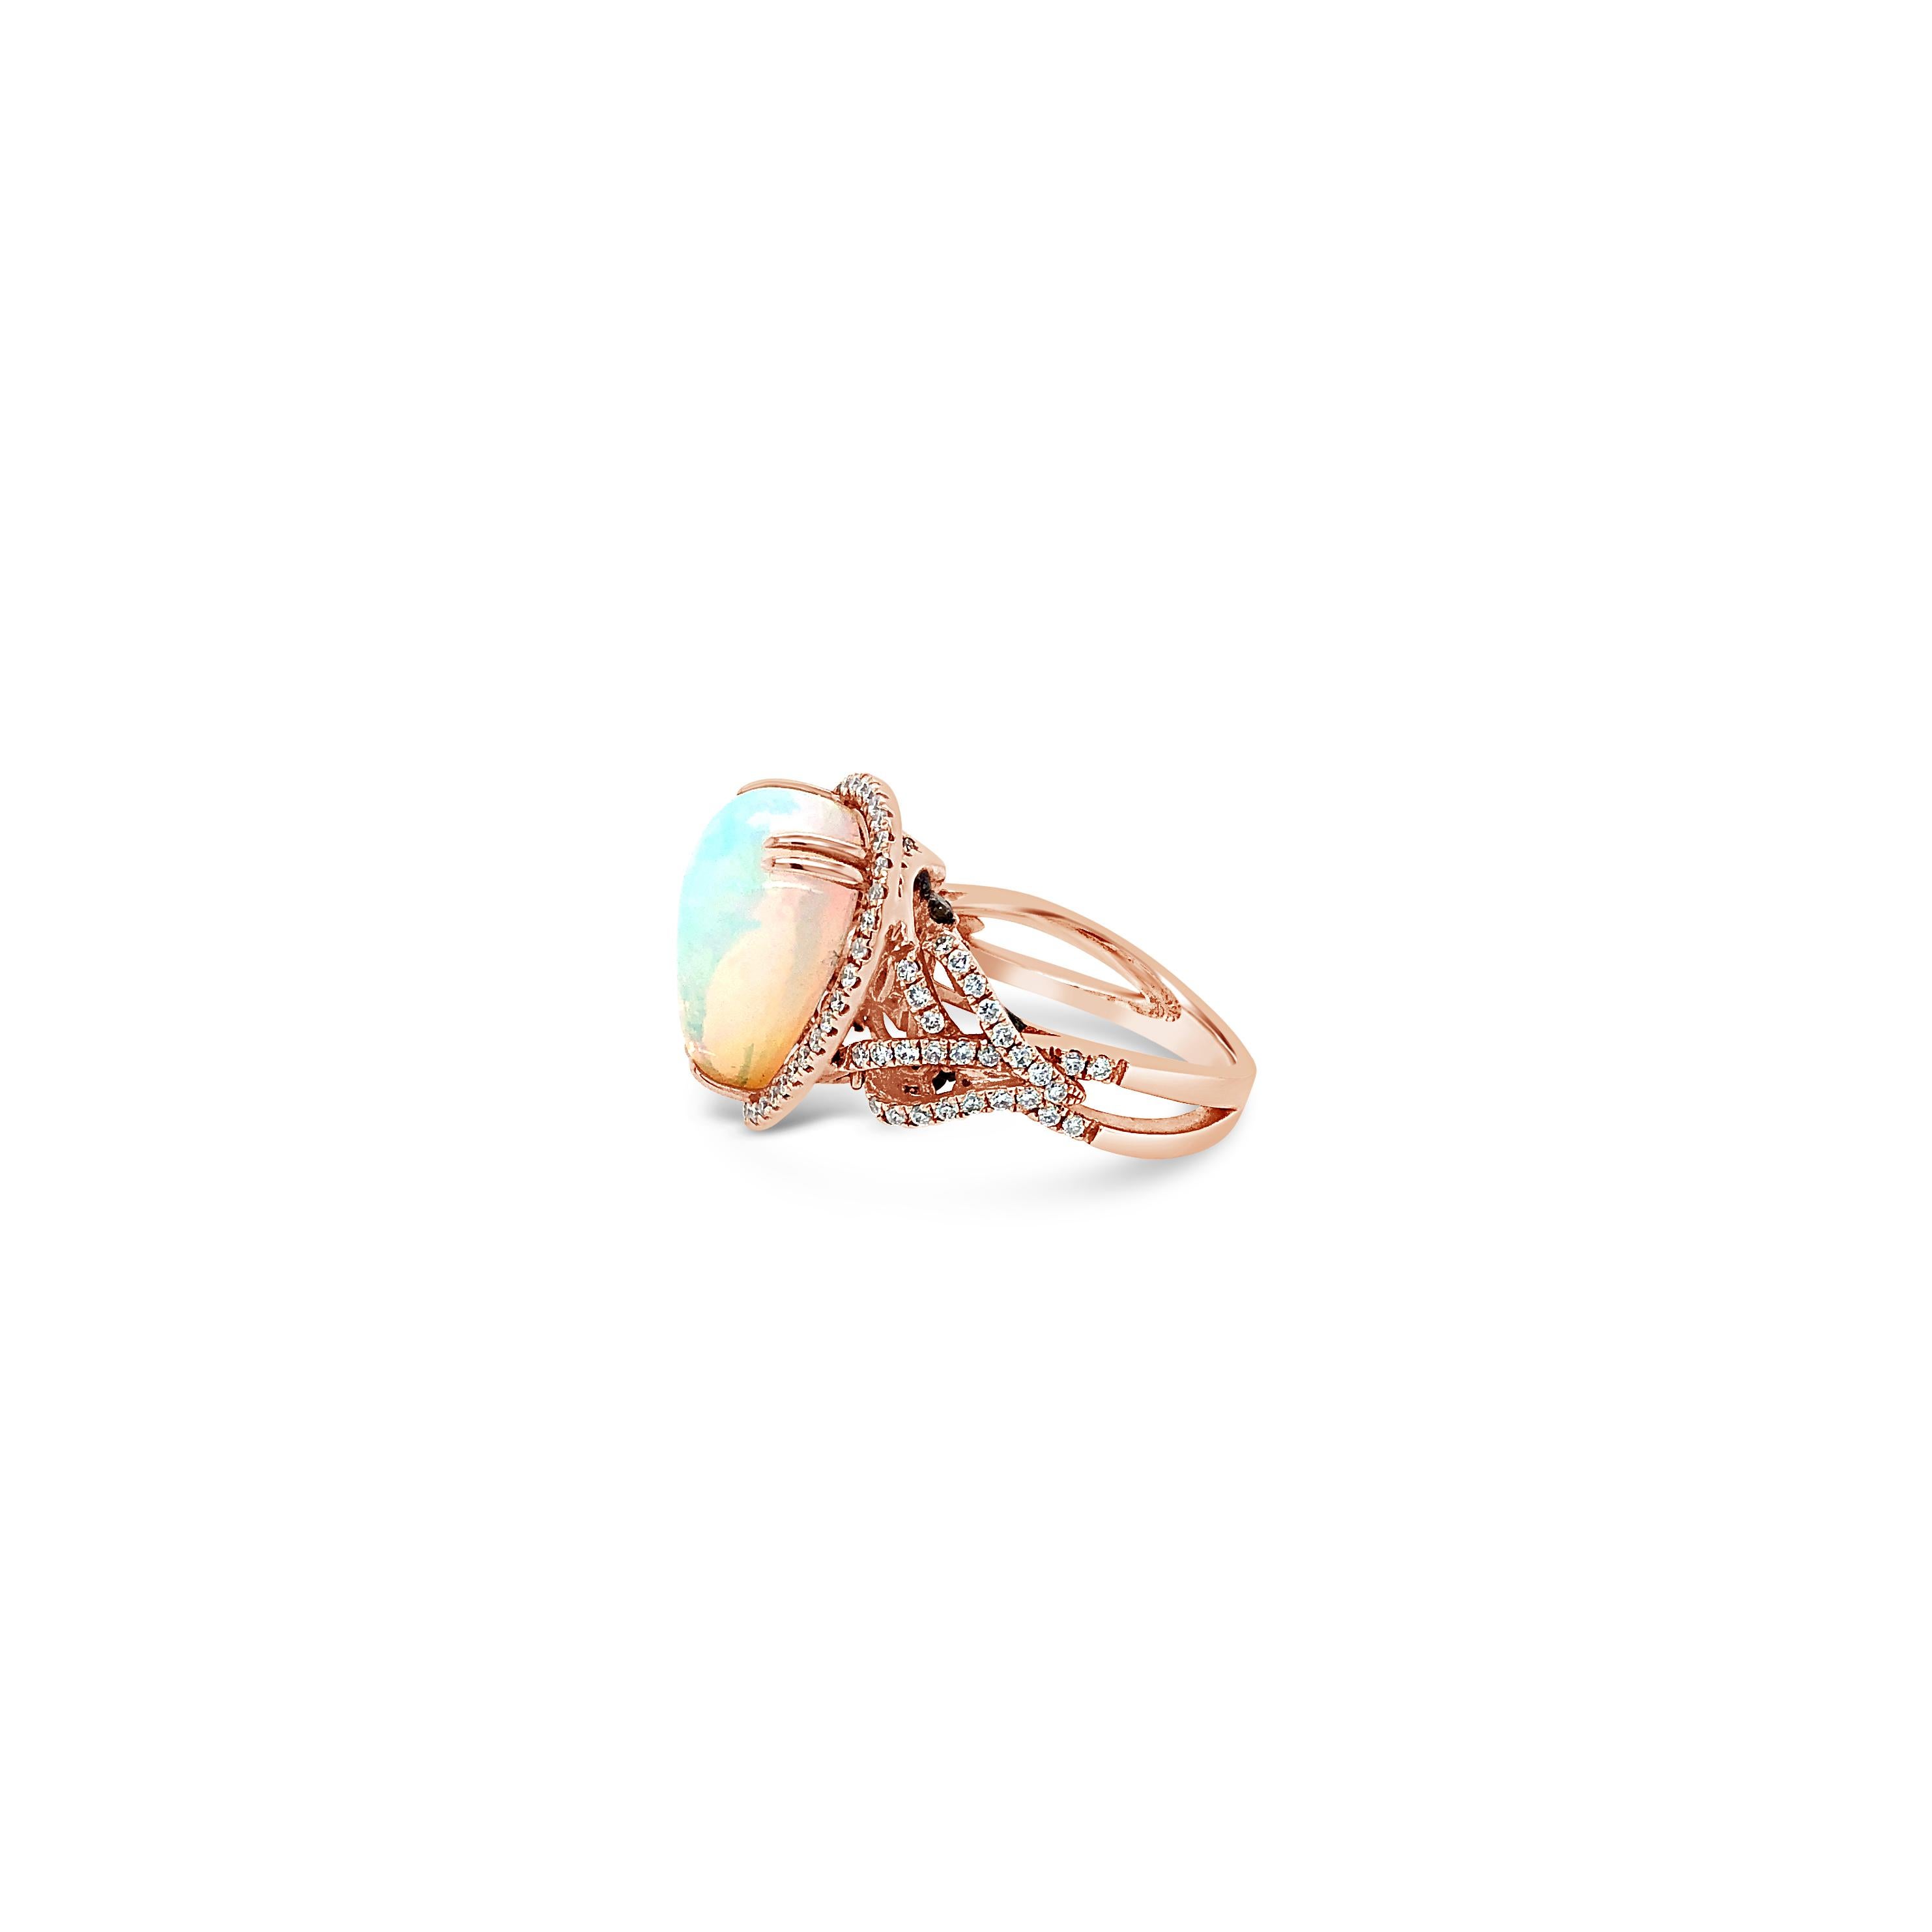 LeVian 18K Rose Gold Opal Round Chocolate Brown Diamond Cocktail Halo Ring
